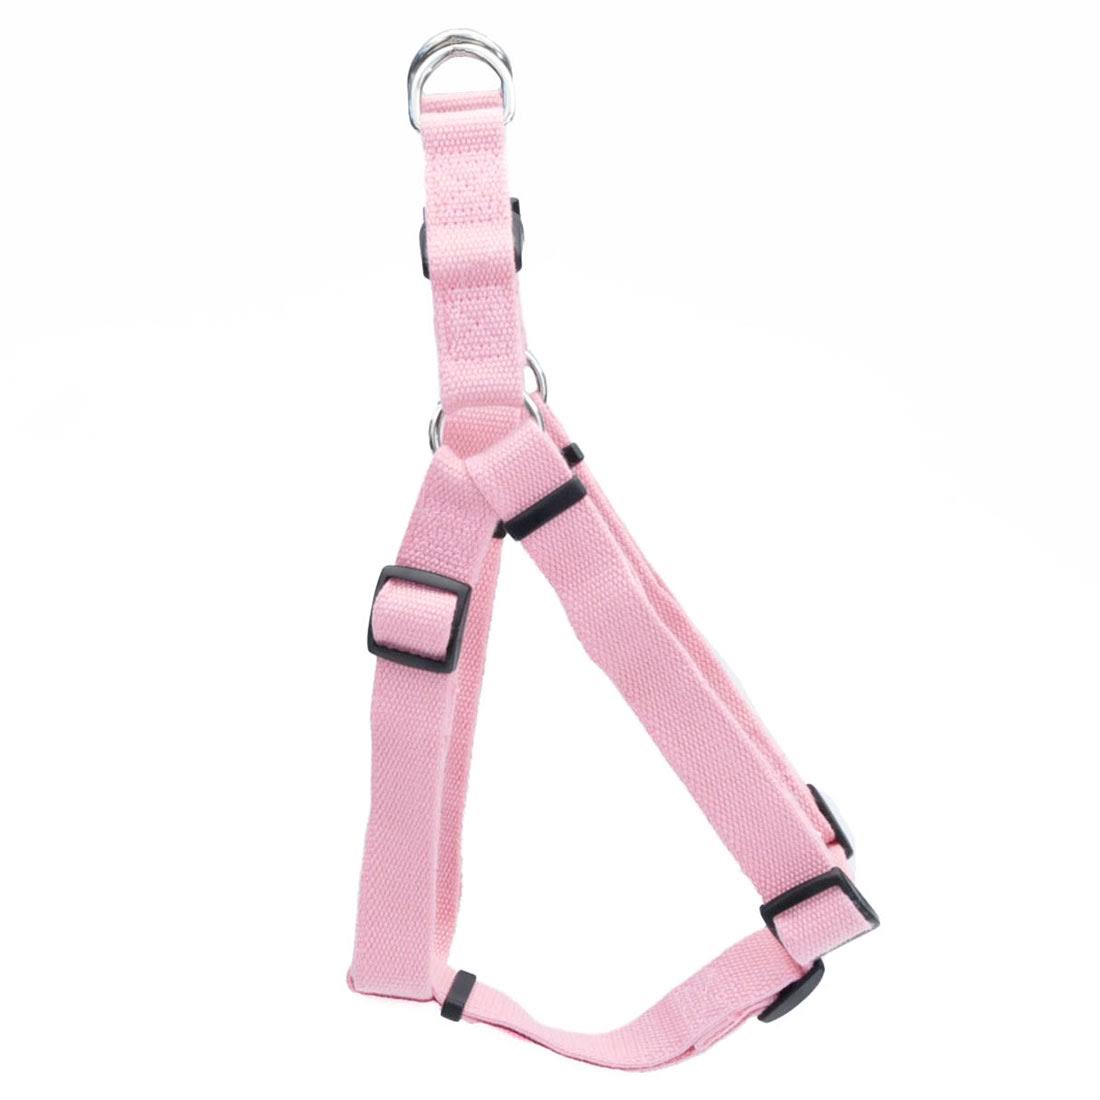 Coastal Pet Products Soy Comfort Dog Harness - Pink Rose, 5/8" Wide x 24"